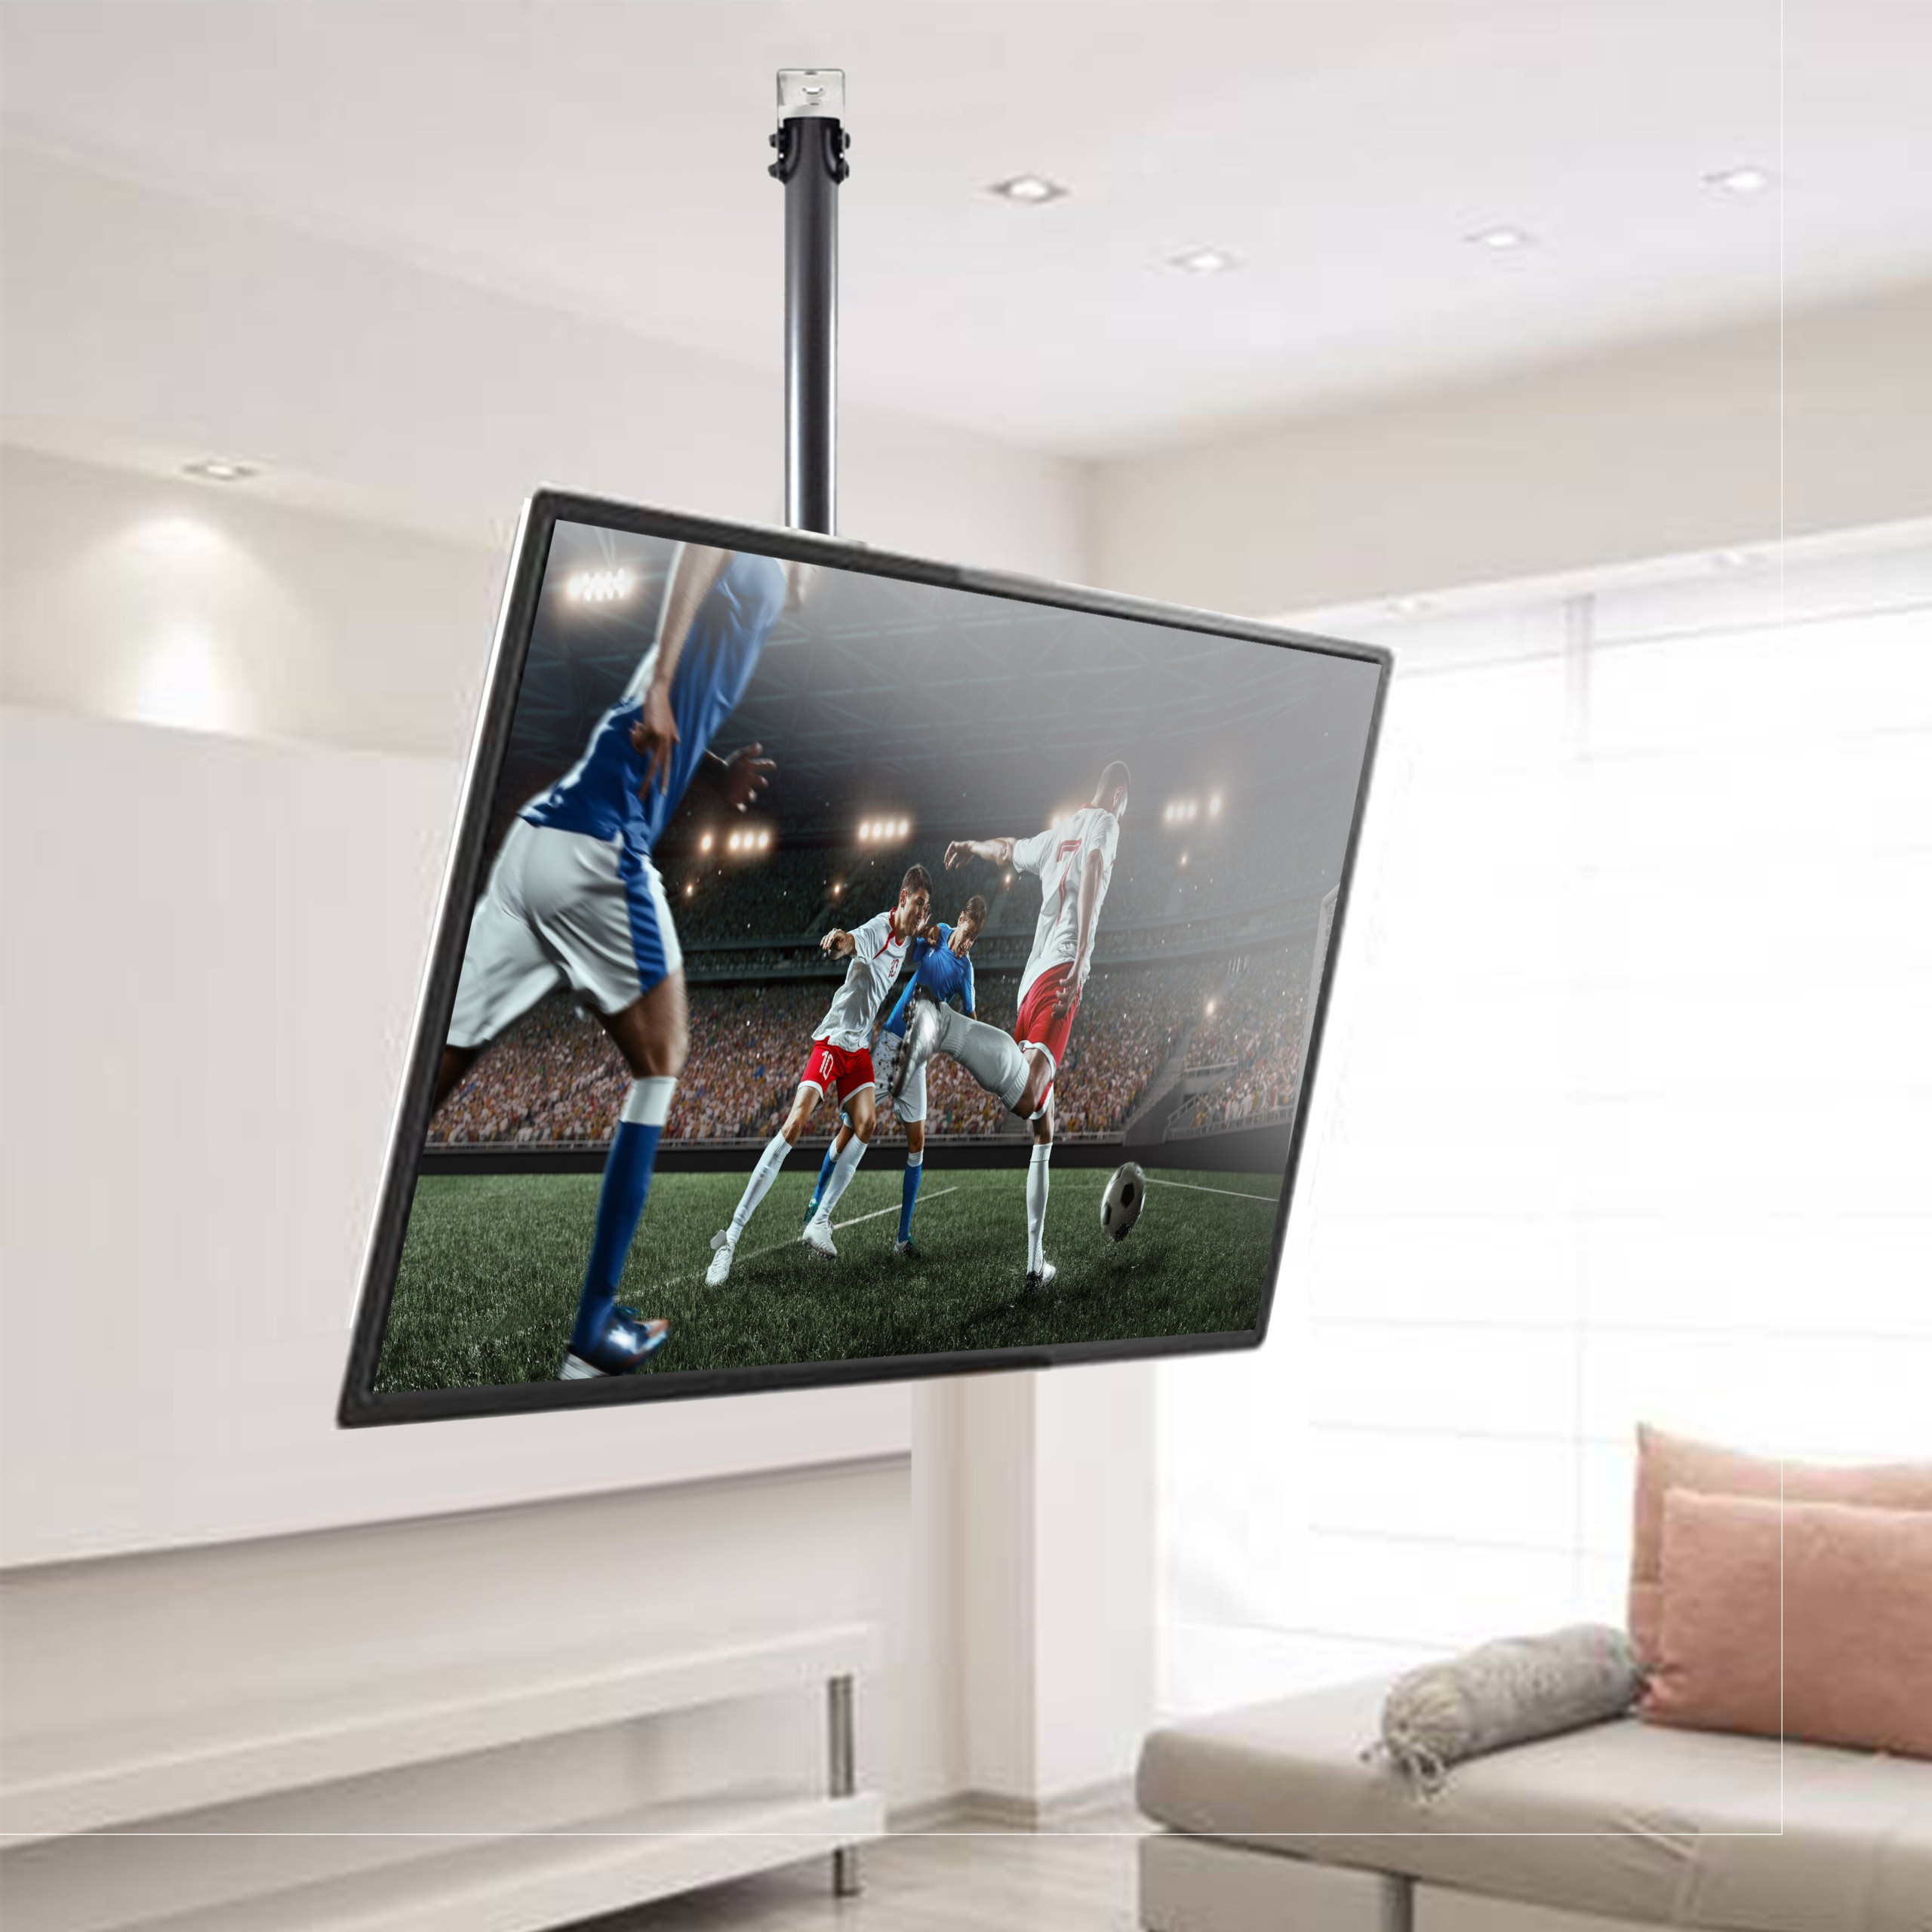 Adjustable TV Monitor Ceiling Mount for 41"- 46" Screens